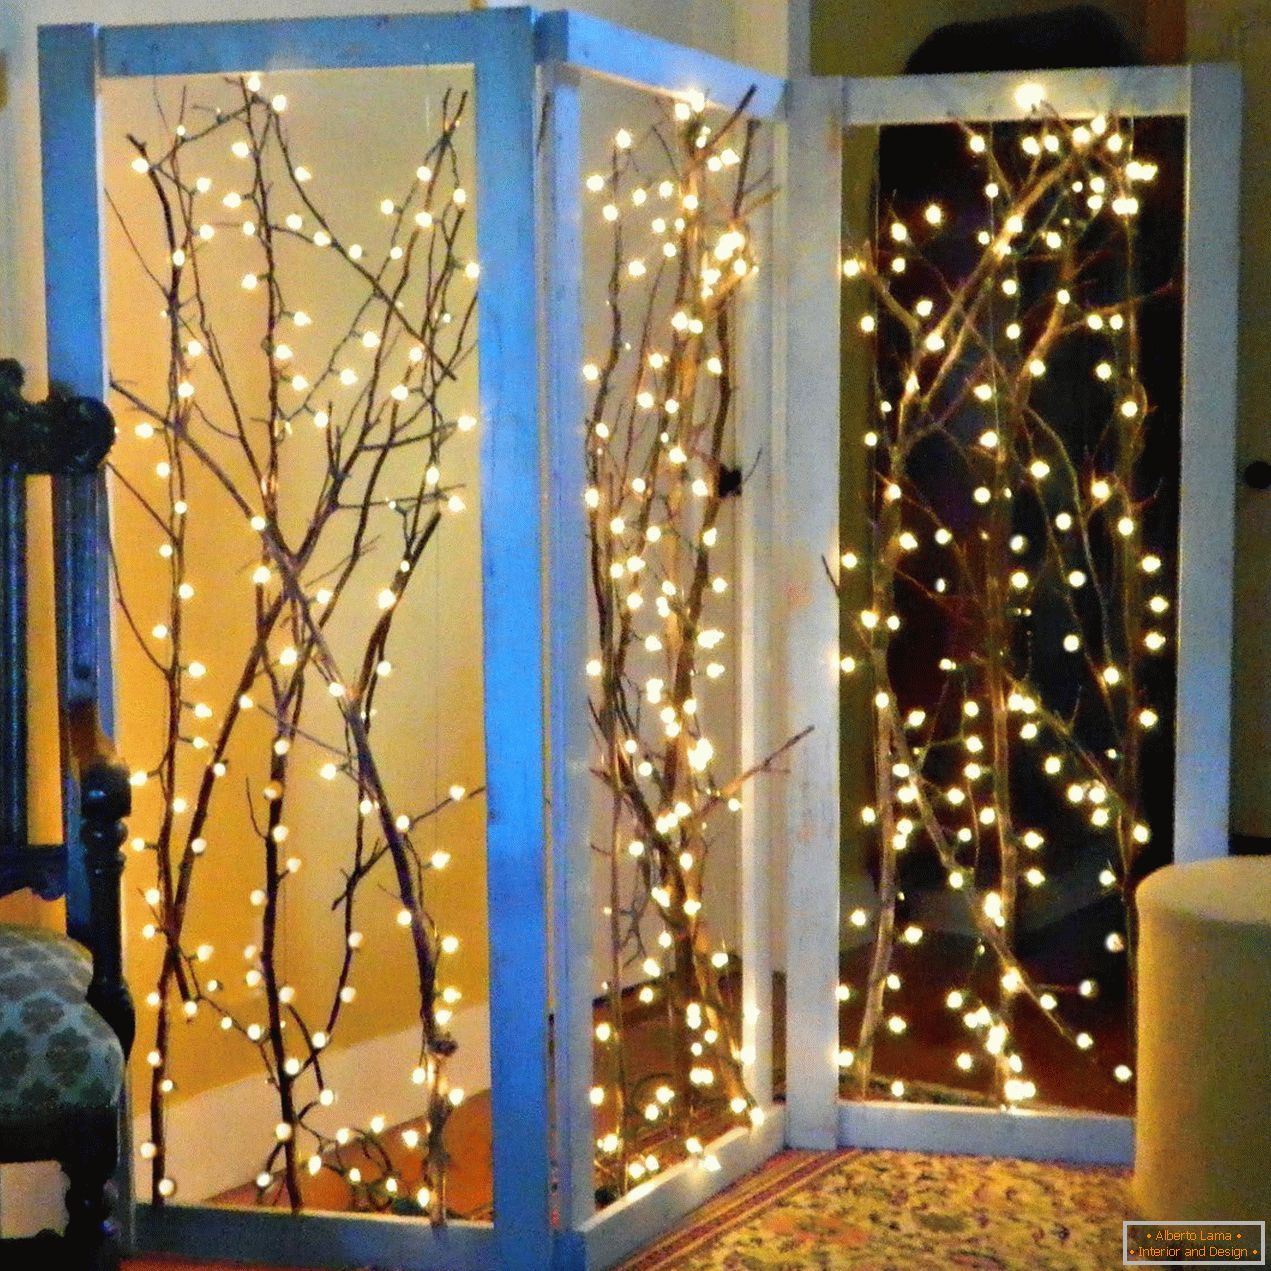 A glowing screen made of twigs and garlands